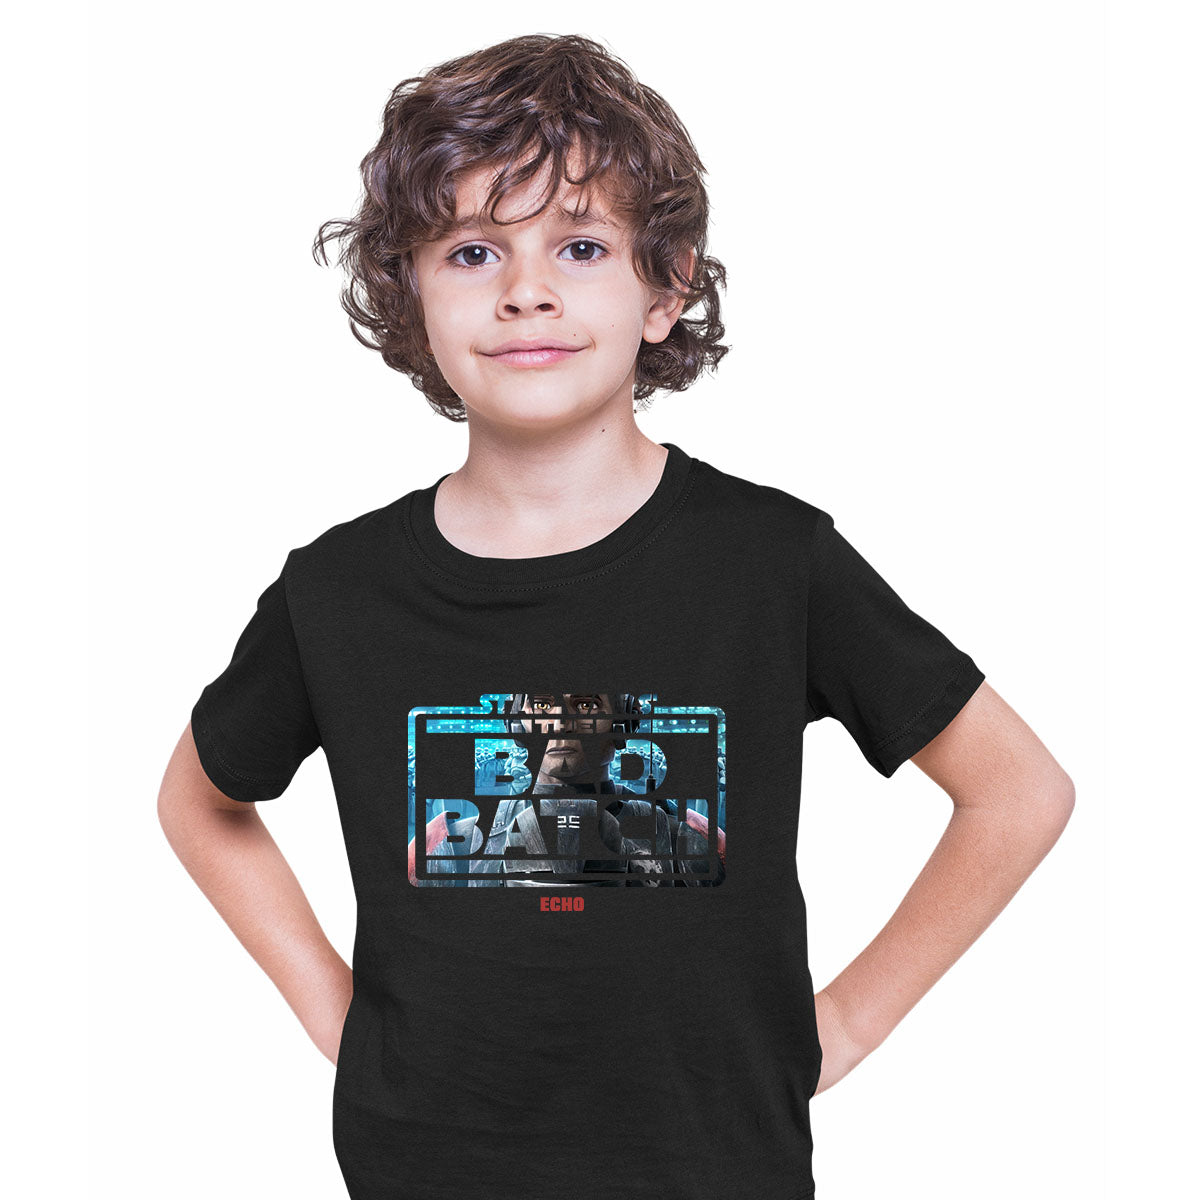 The Bad Batch - Echo Clone Wars T-Shirt Novelty Funny Gift Movie Colorful T-shirt for Kids - Kuzi Tees